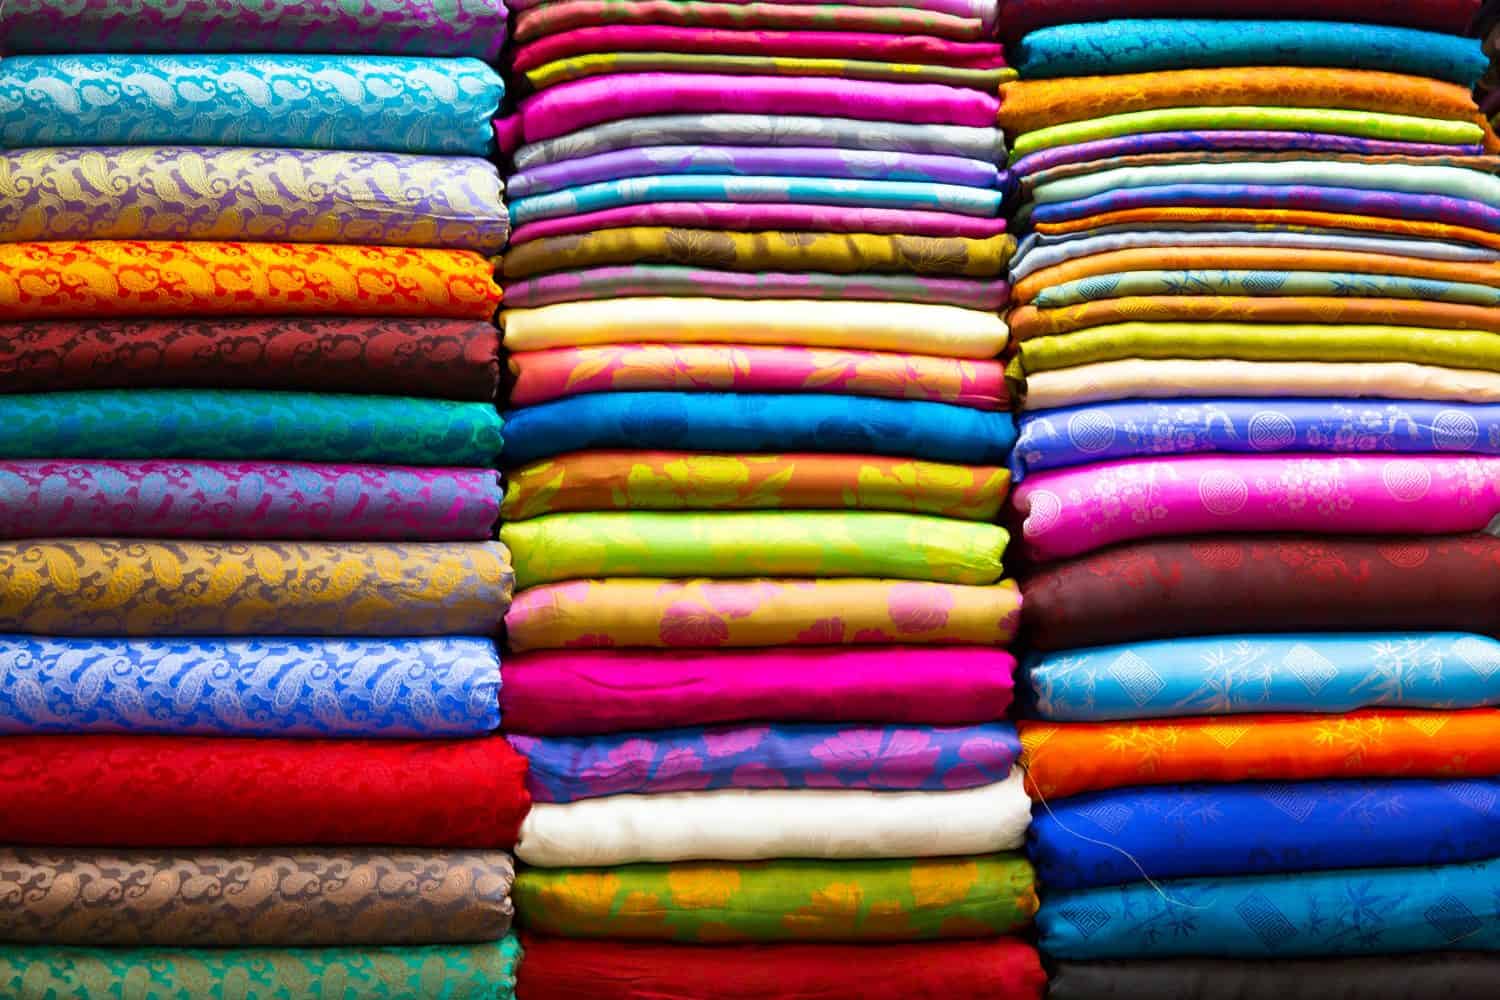 Many colorful material silk on the market. Very popular and traditional souvenir from Vietnam.